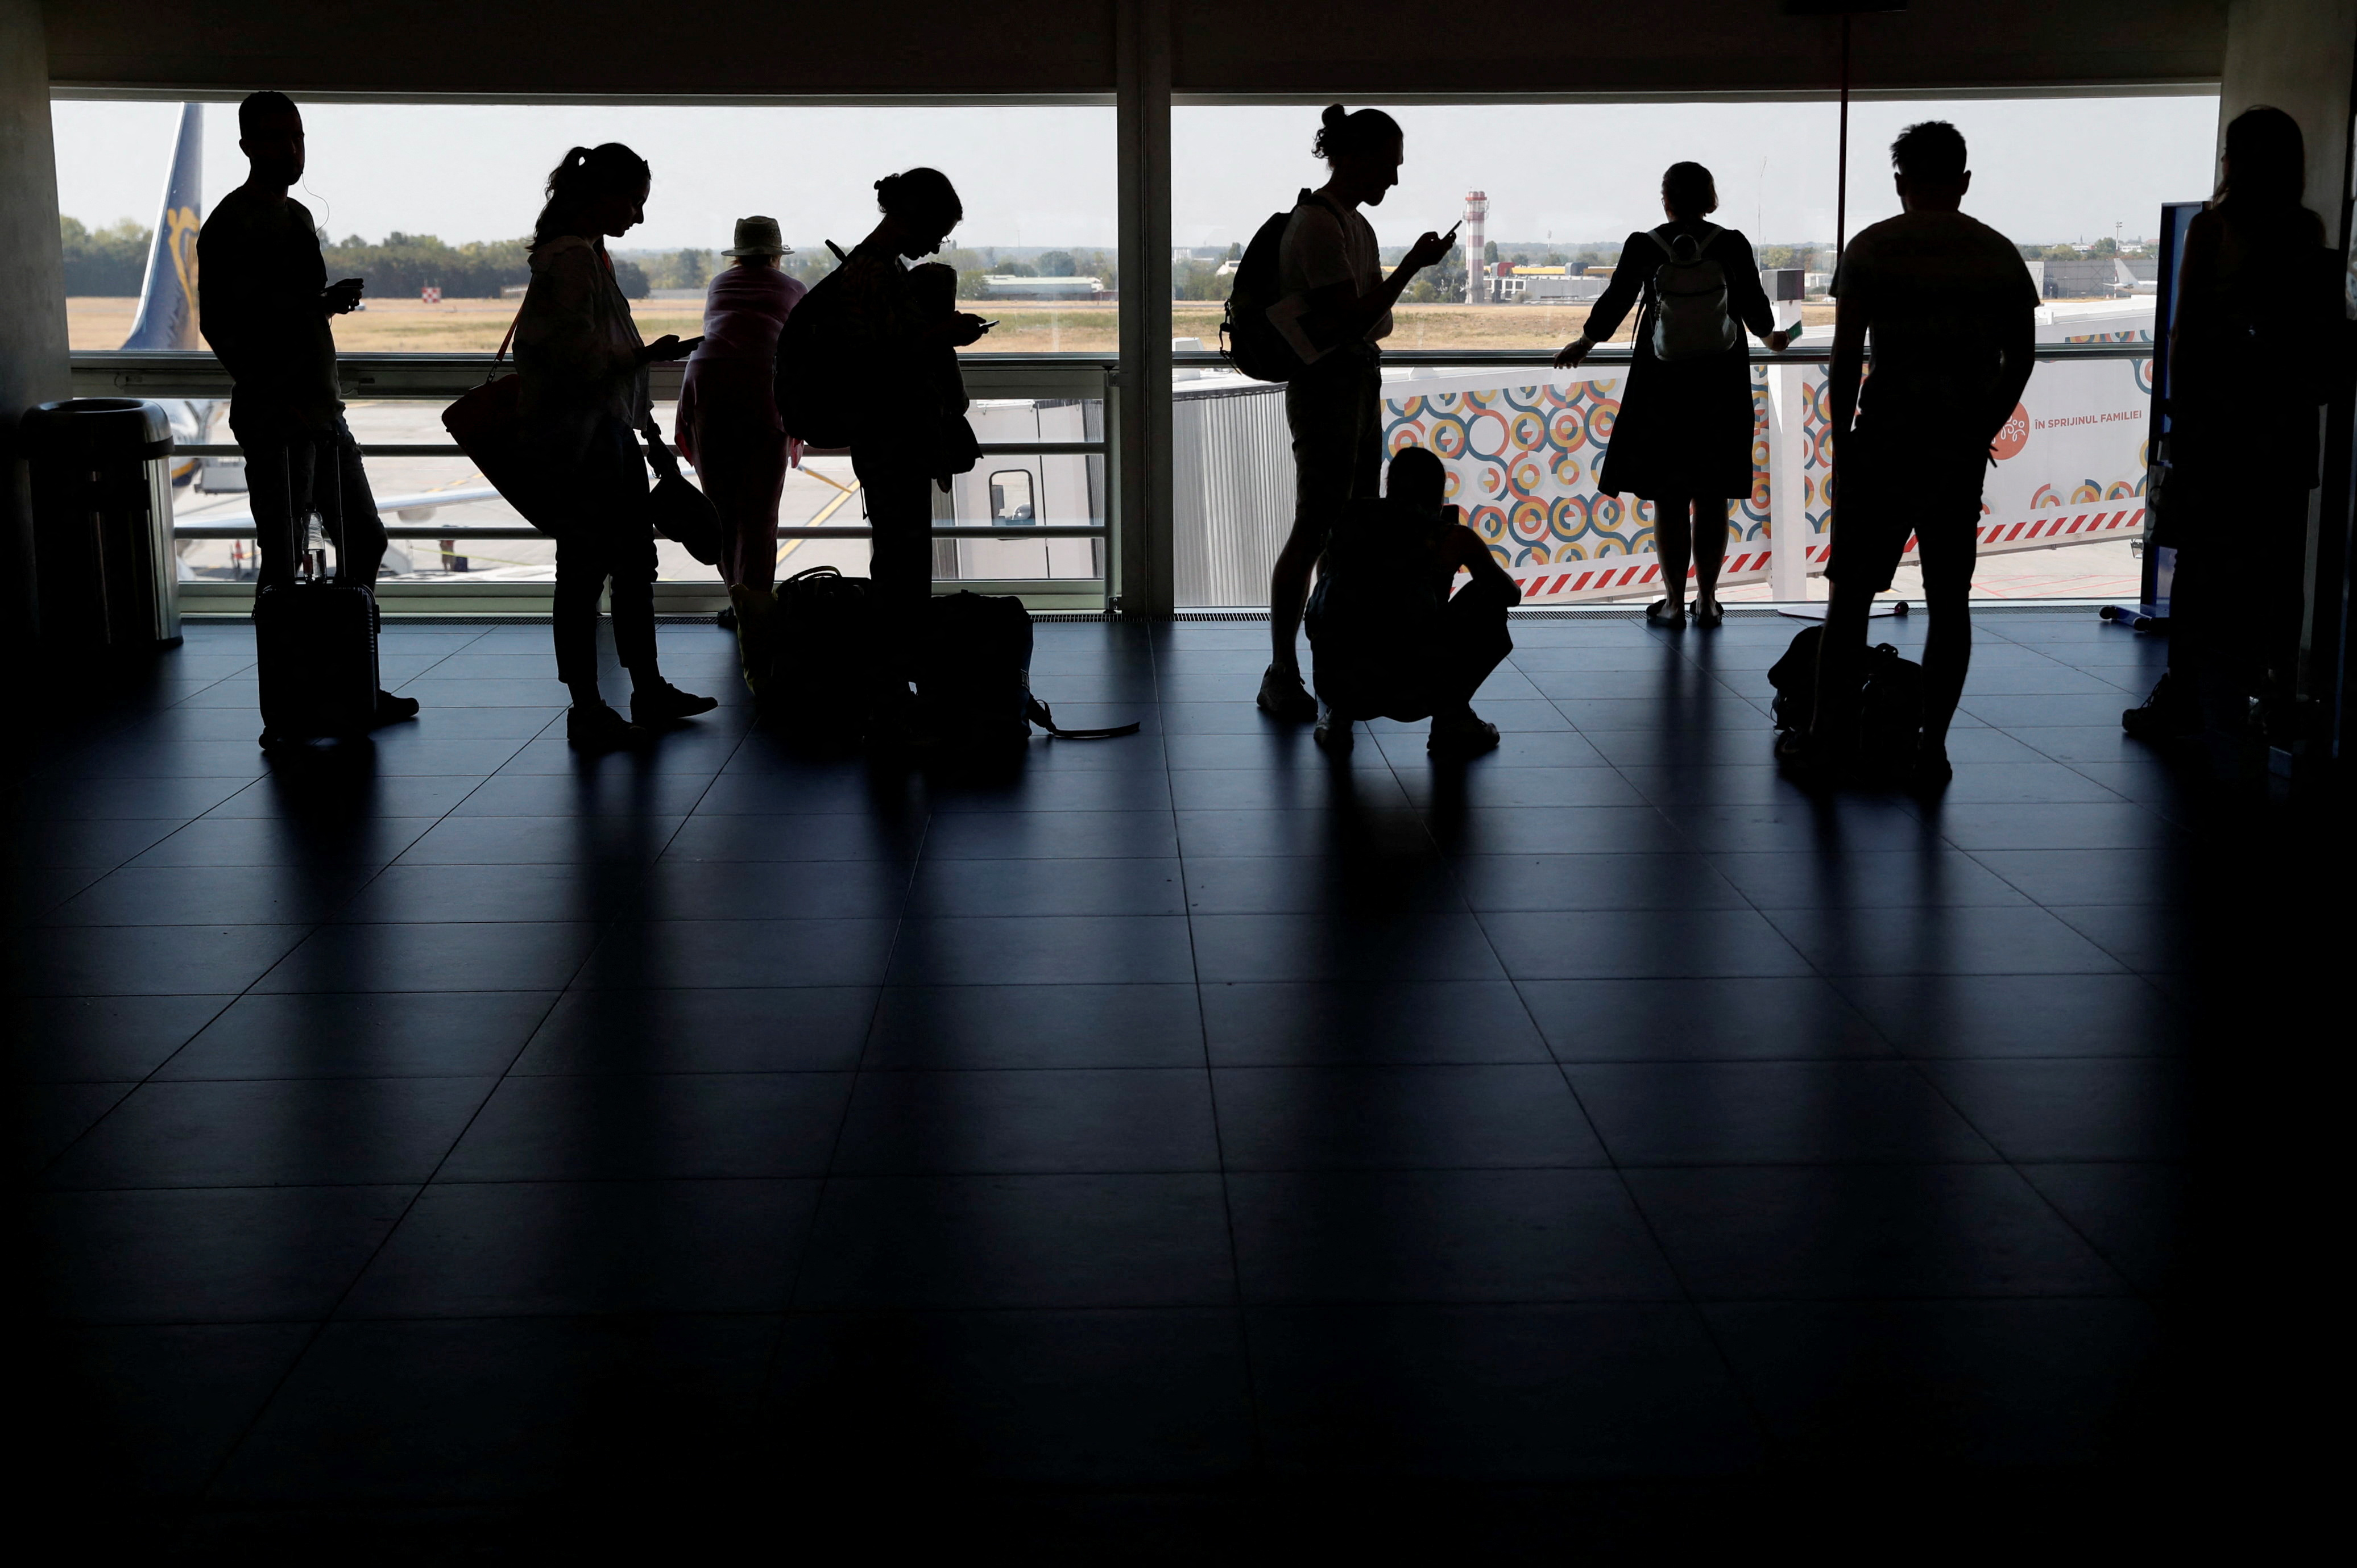 Passangers wait at Pier B of Ferenc Liszt International Airport in Budapest